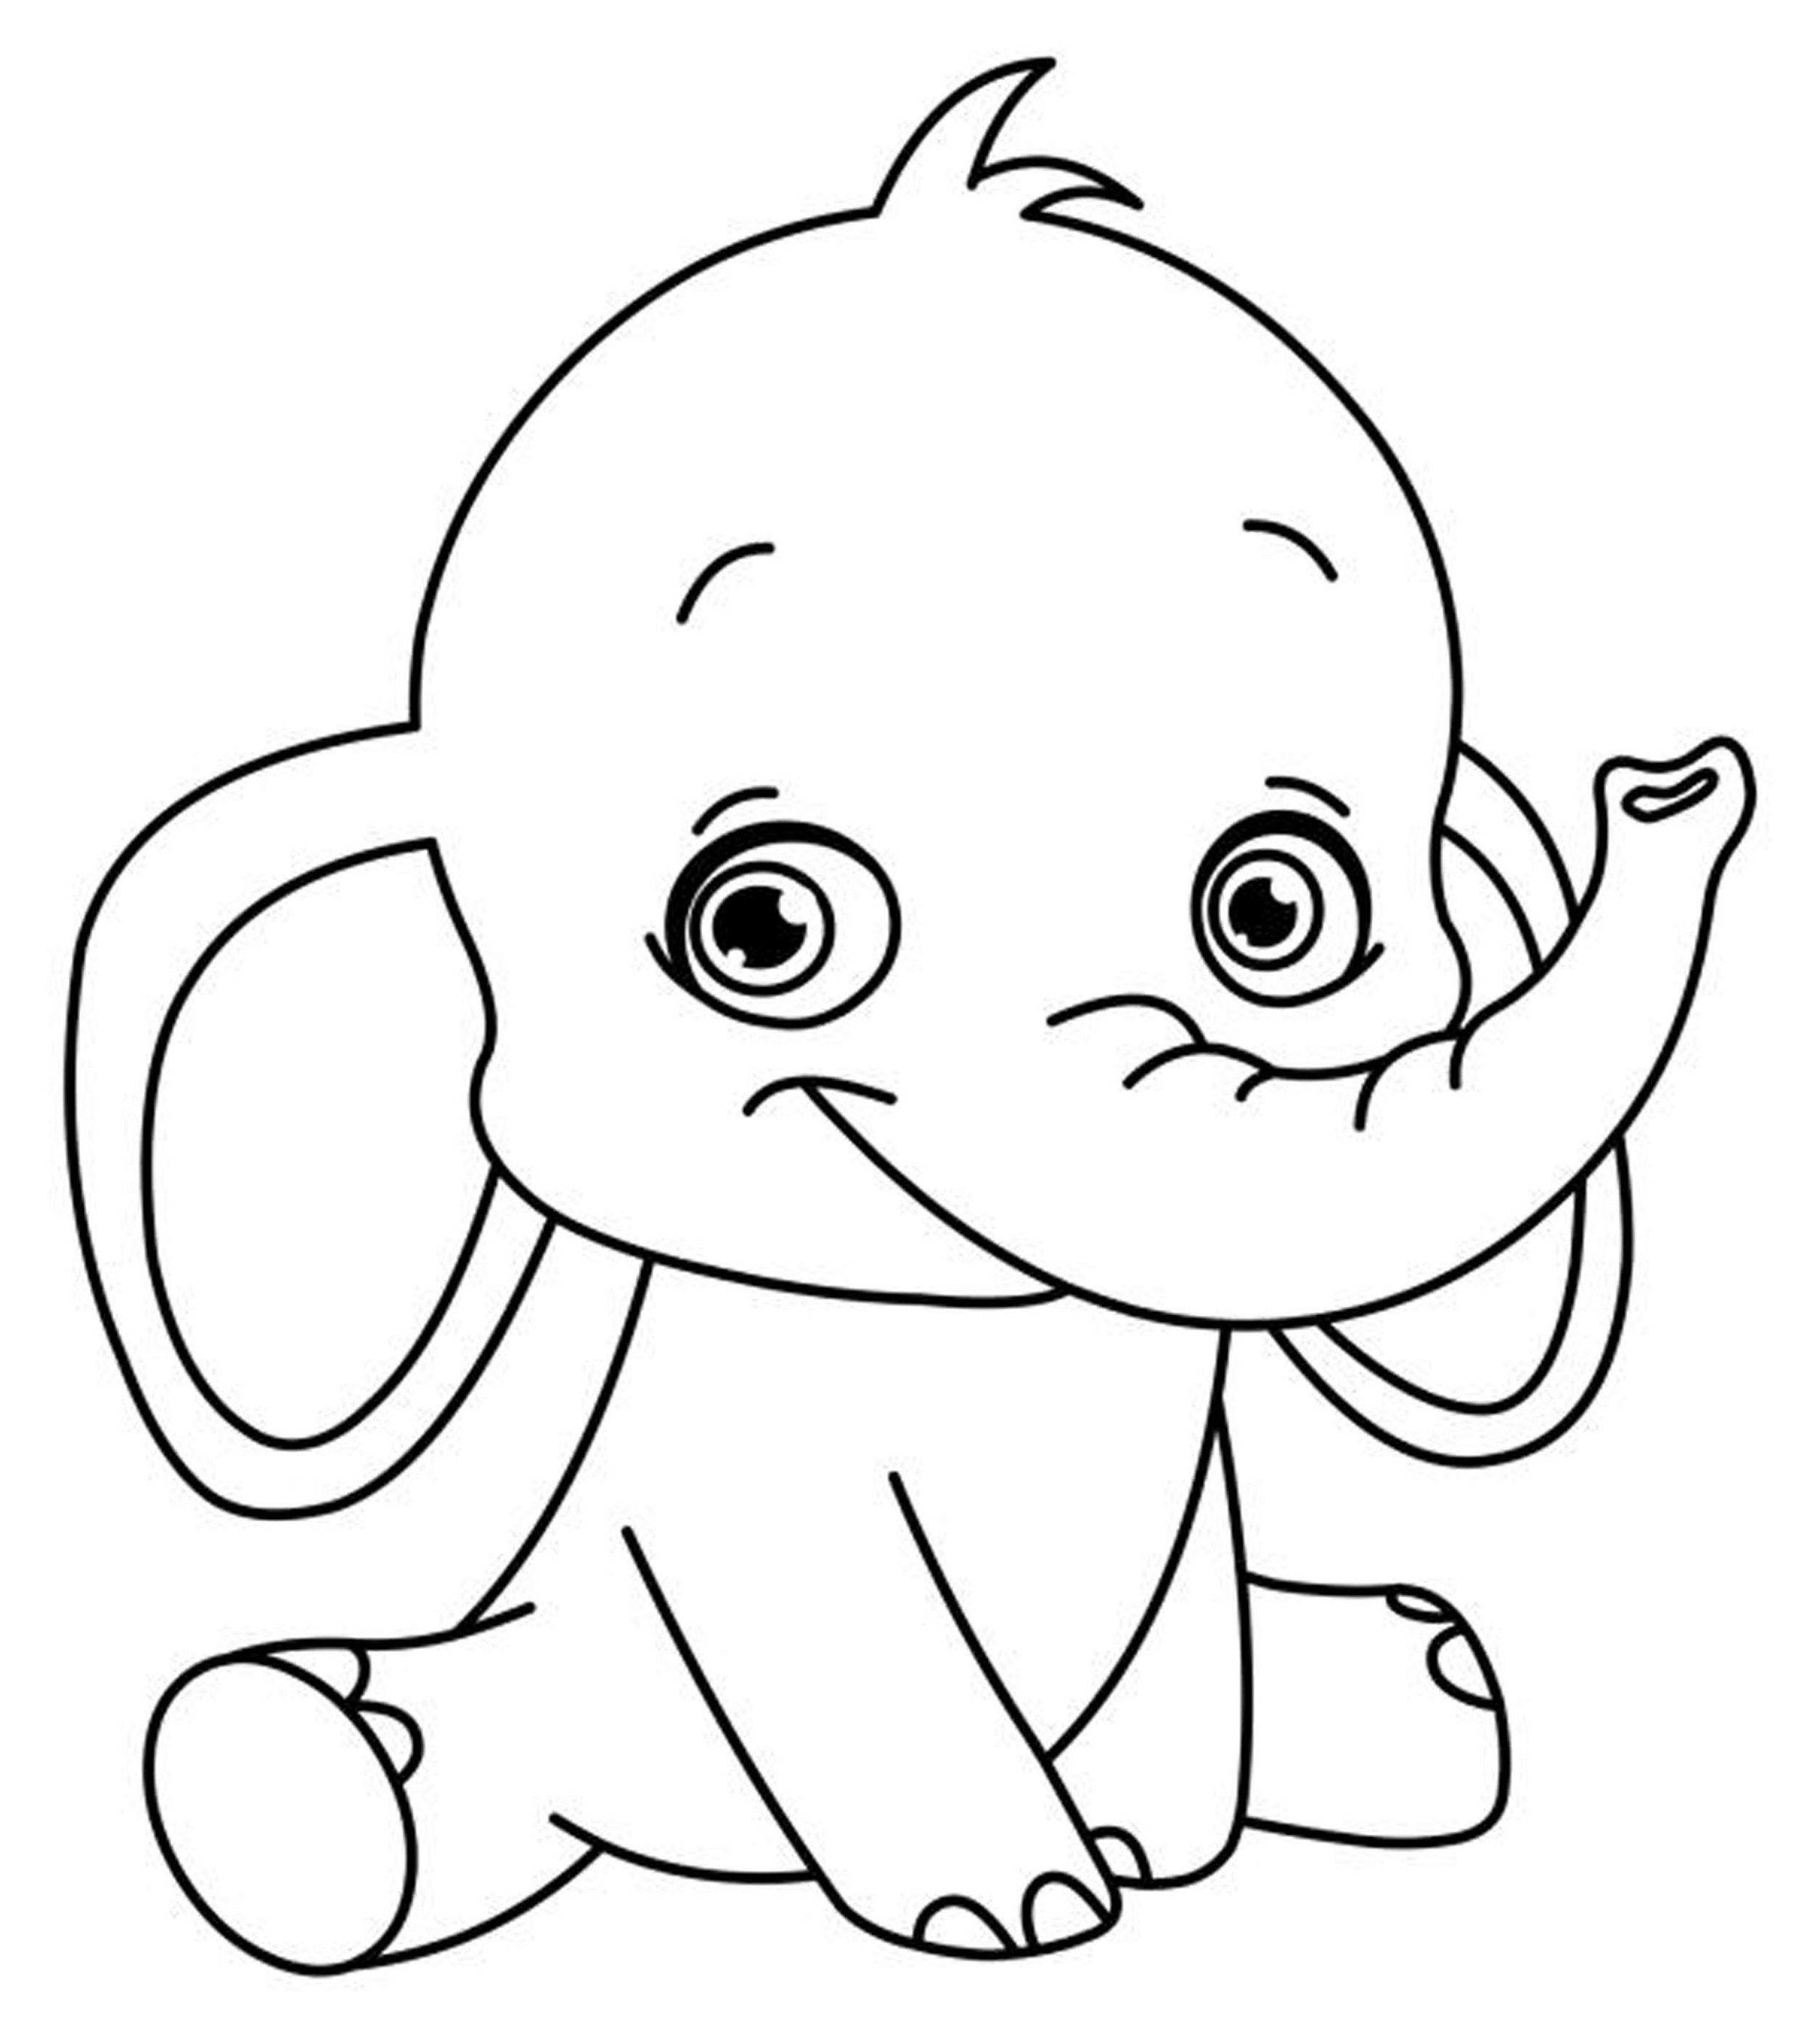 Amazing of Fun Disney Coloring Pages For Girls By Disney #128